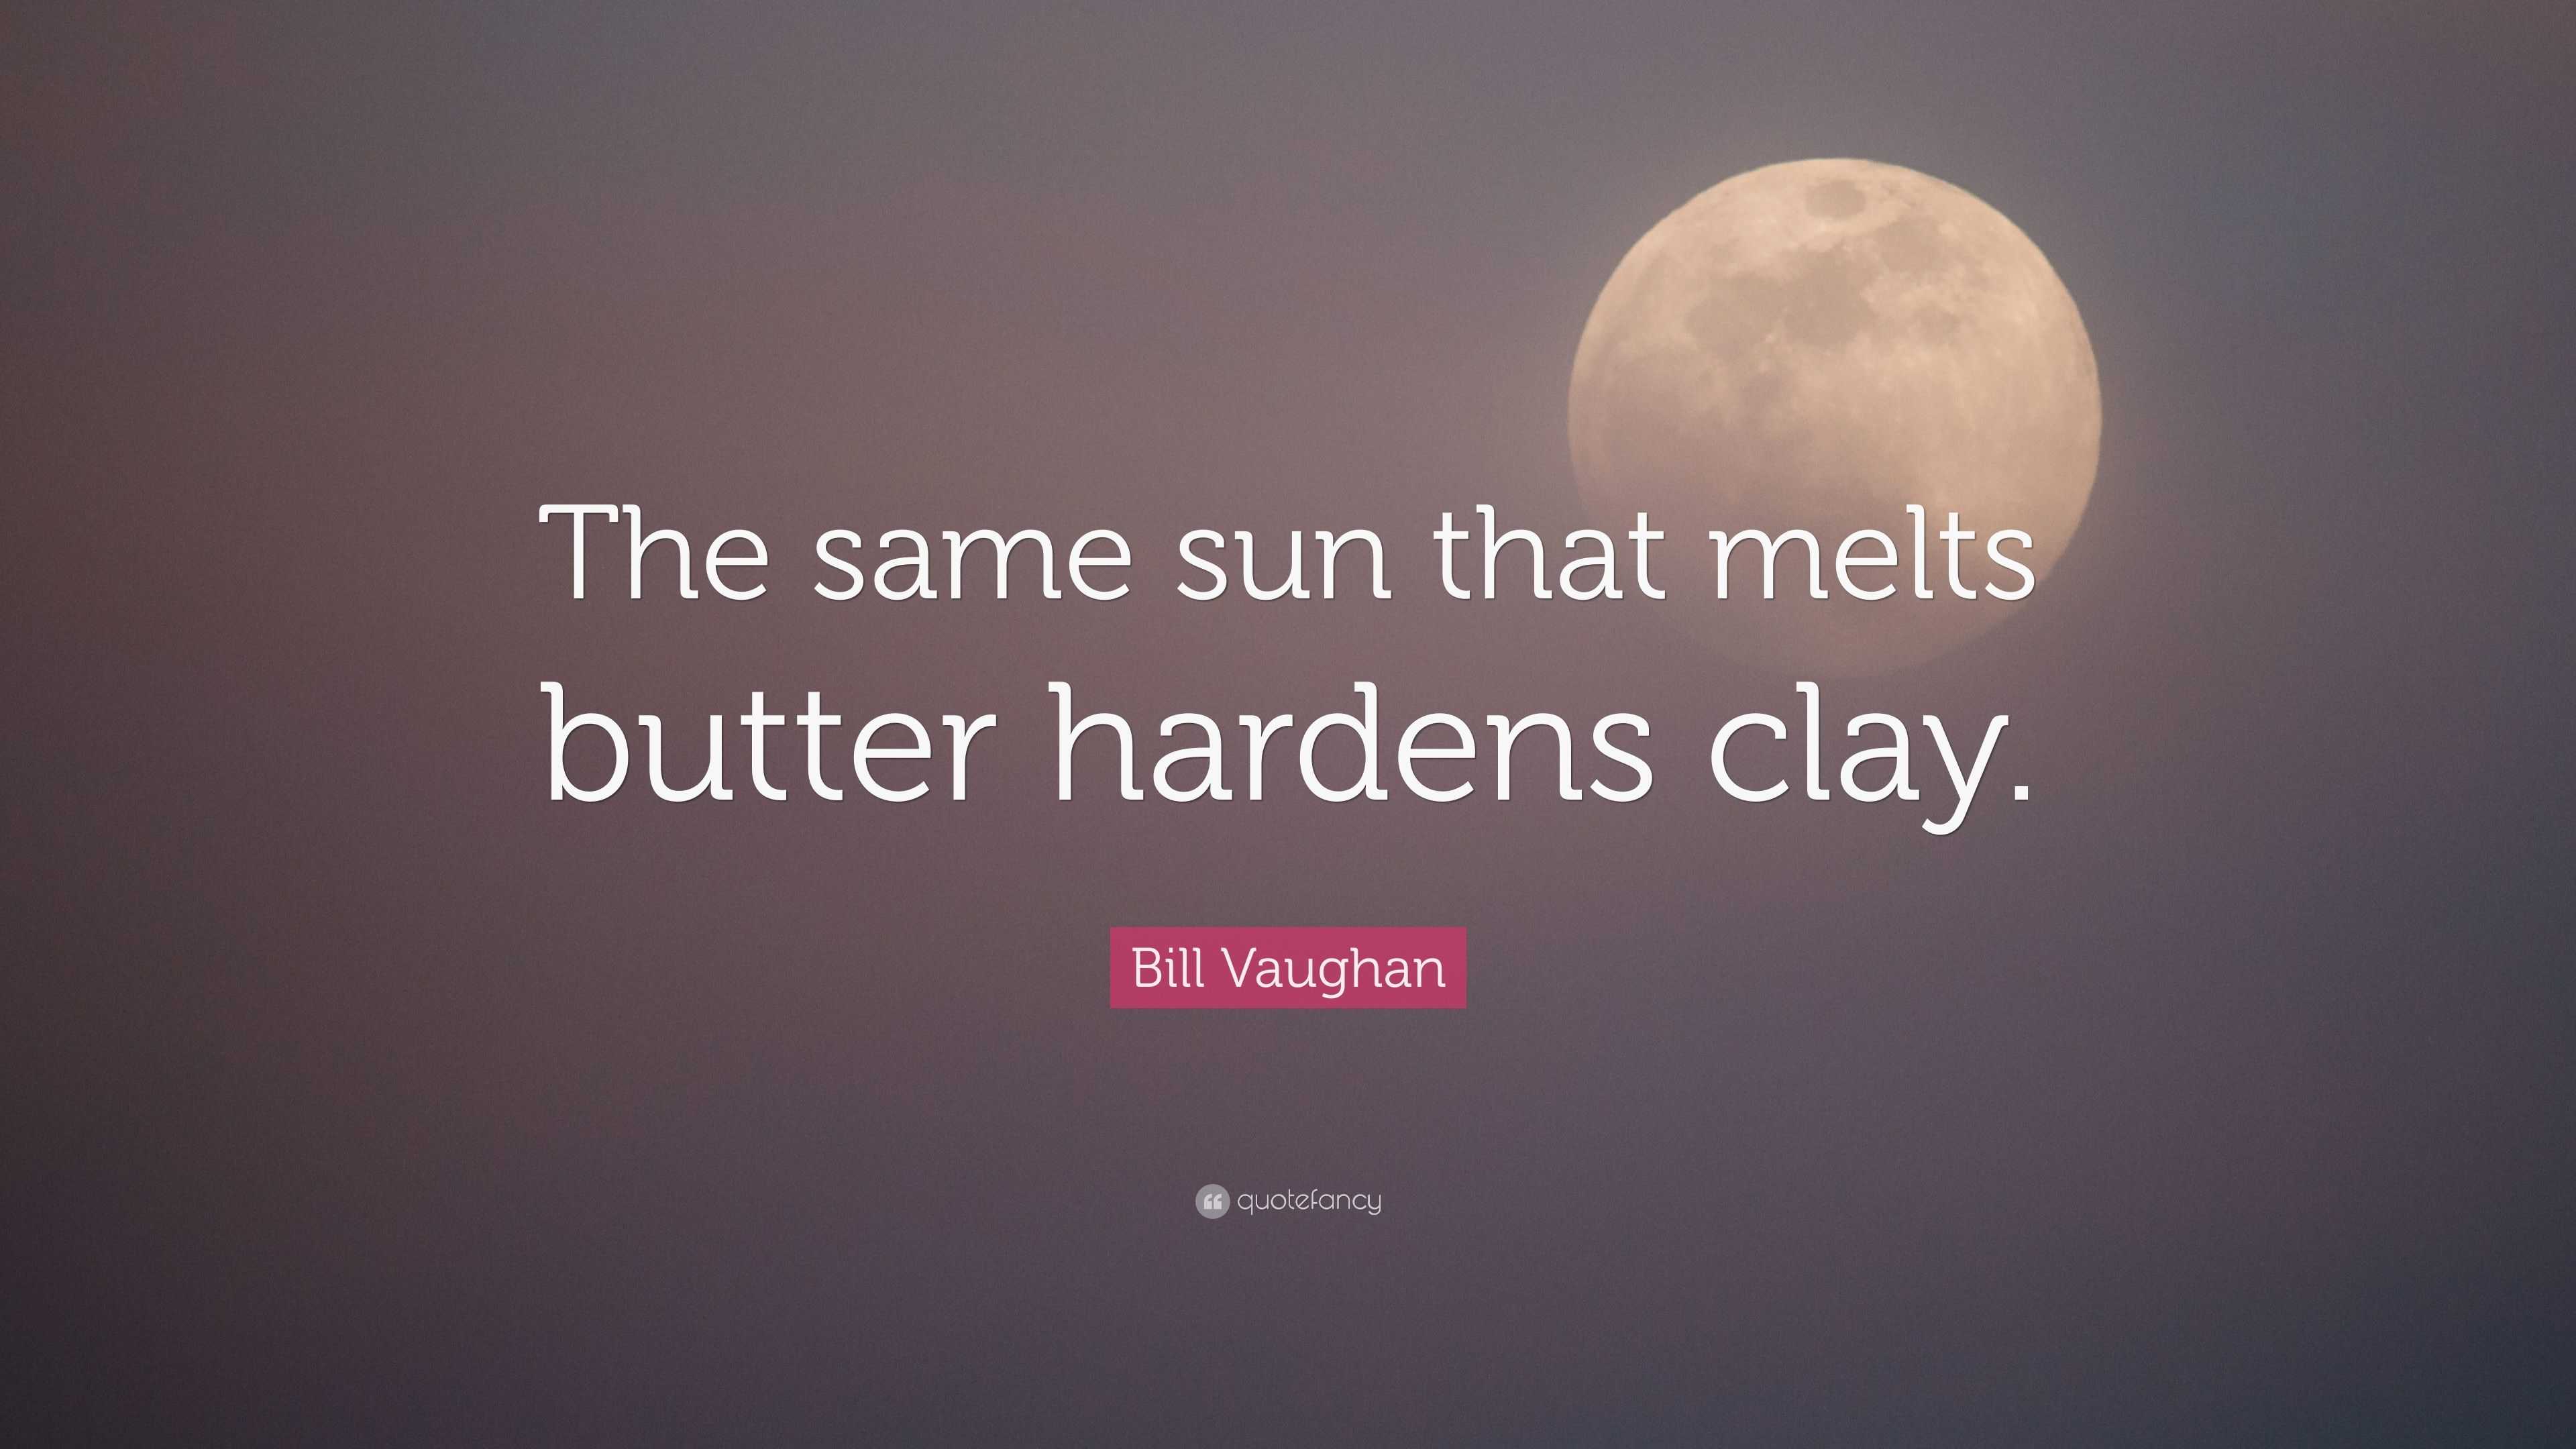 Bill Vaughan Quote: “The same sun that melts butter hardens clay.”